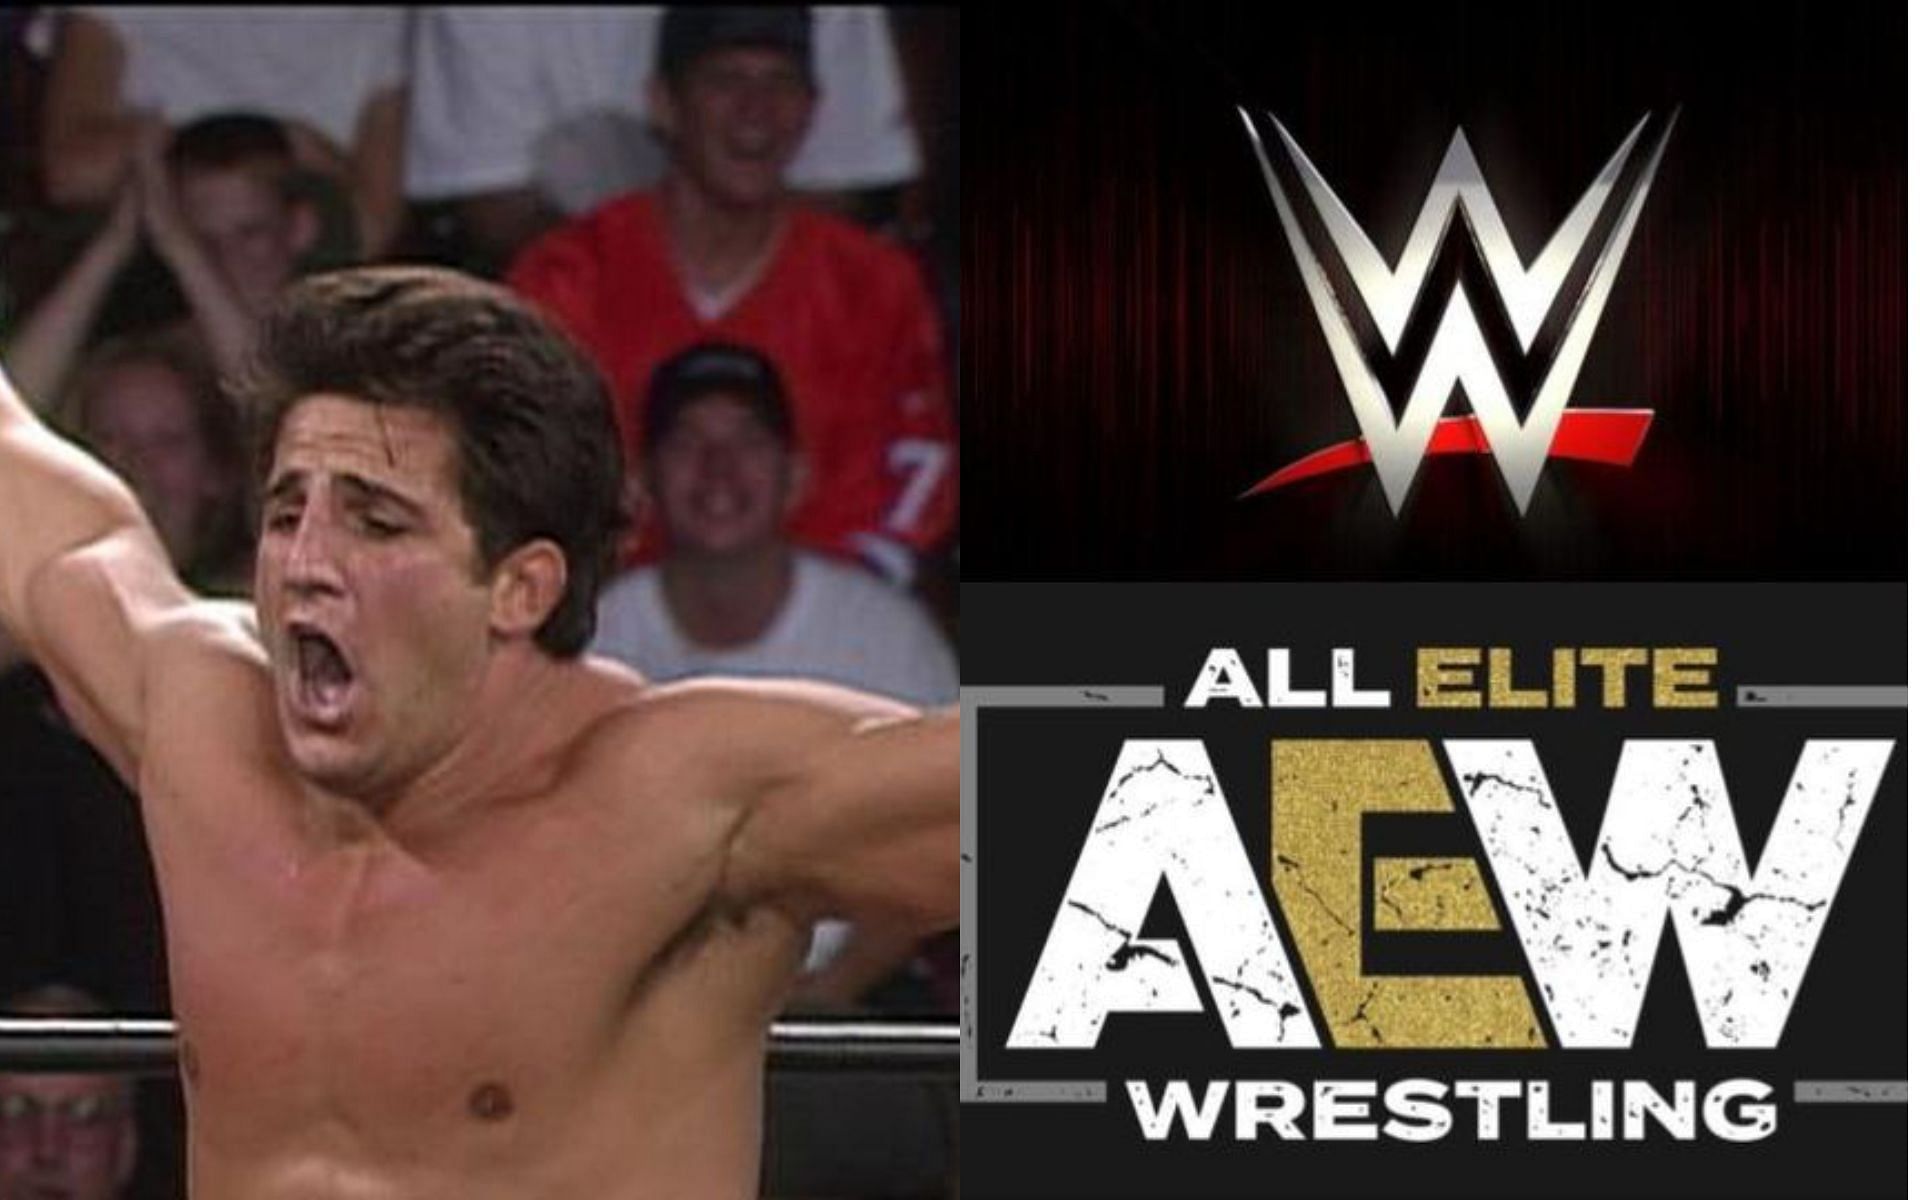 WCW legend Disco Inferno gave his thoughts on AEW